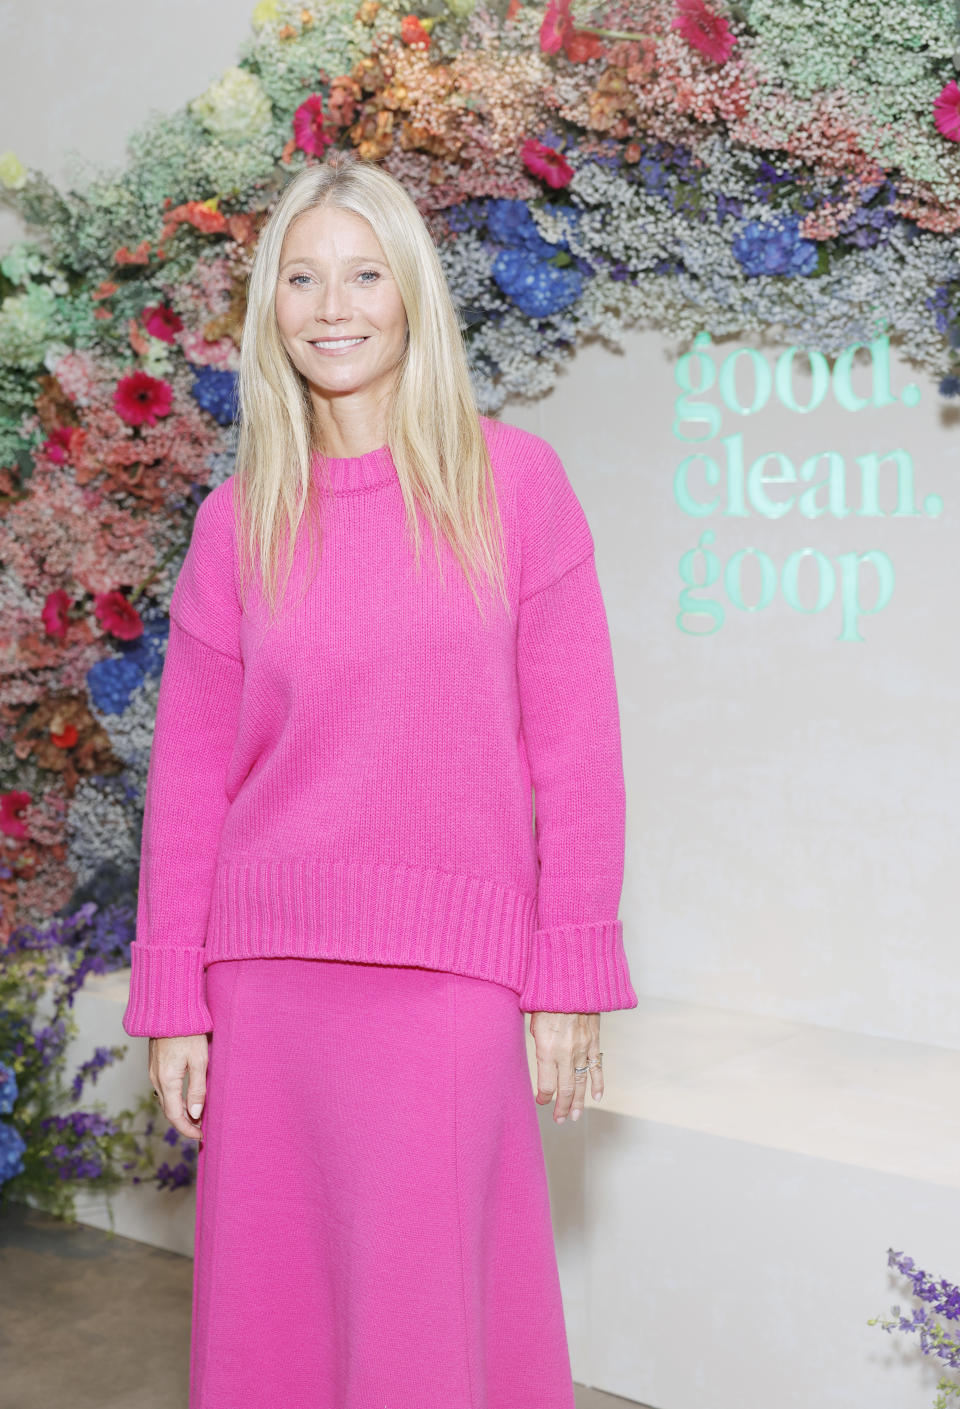 SANTA MONICA, CALIFORNIA - OCTOBER 18: Gwyneth Paltrow Celebrates The Launch Of good.clean.goop at Goop on October 18, 2023 in Santa Monica, California. (Photo by Stefanie Keenan/Getty Images for good.clean.goop)